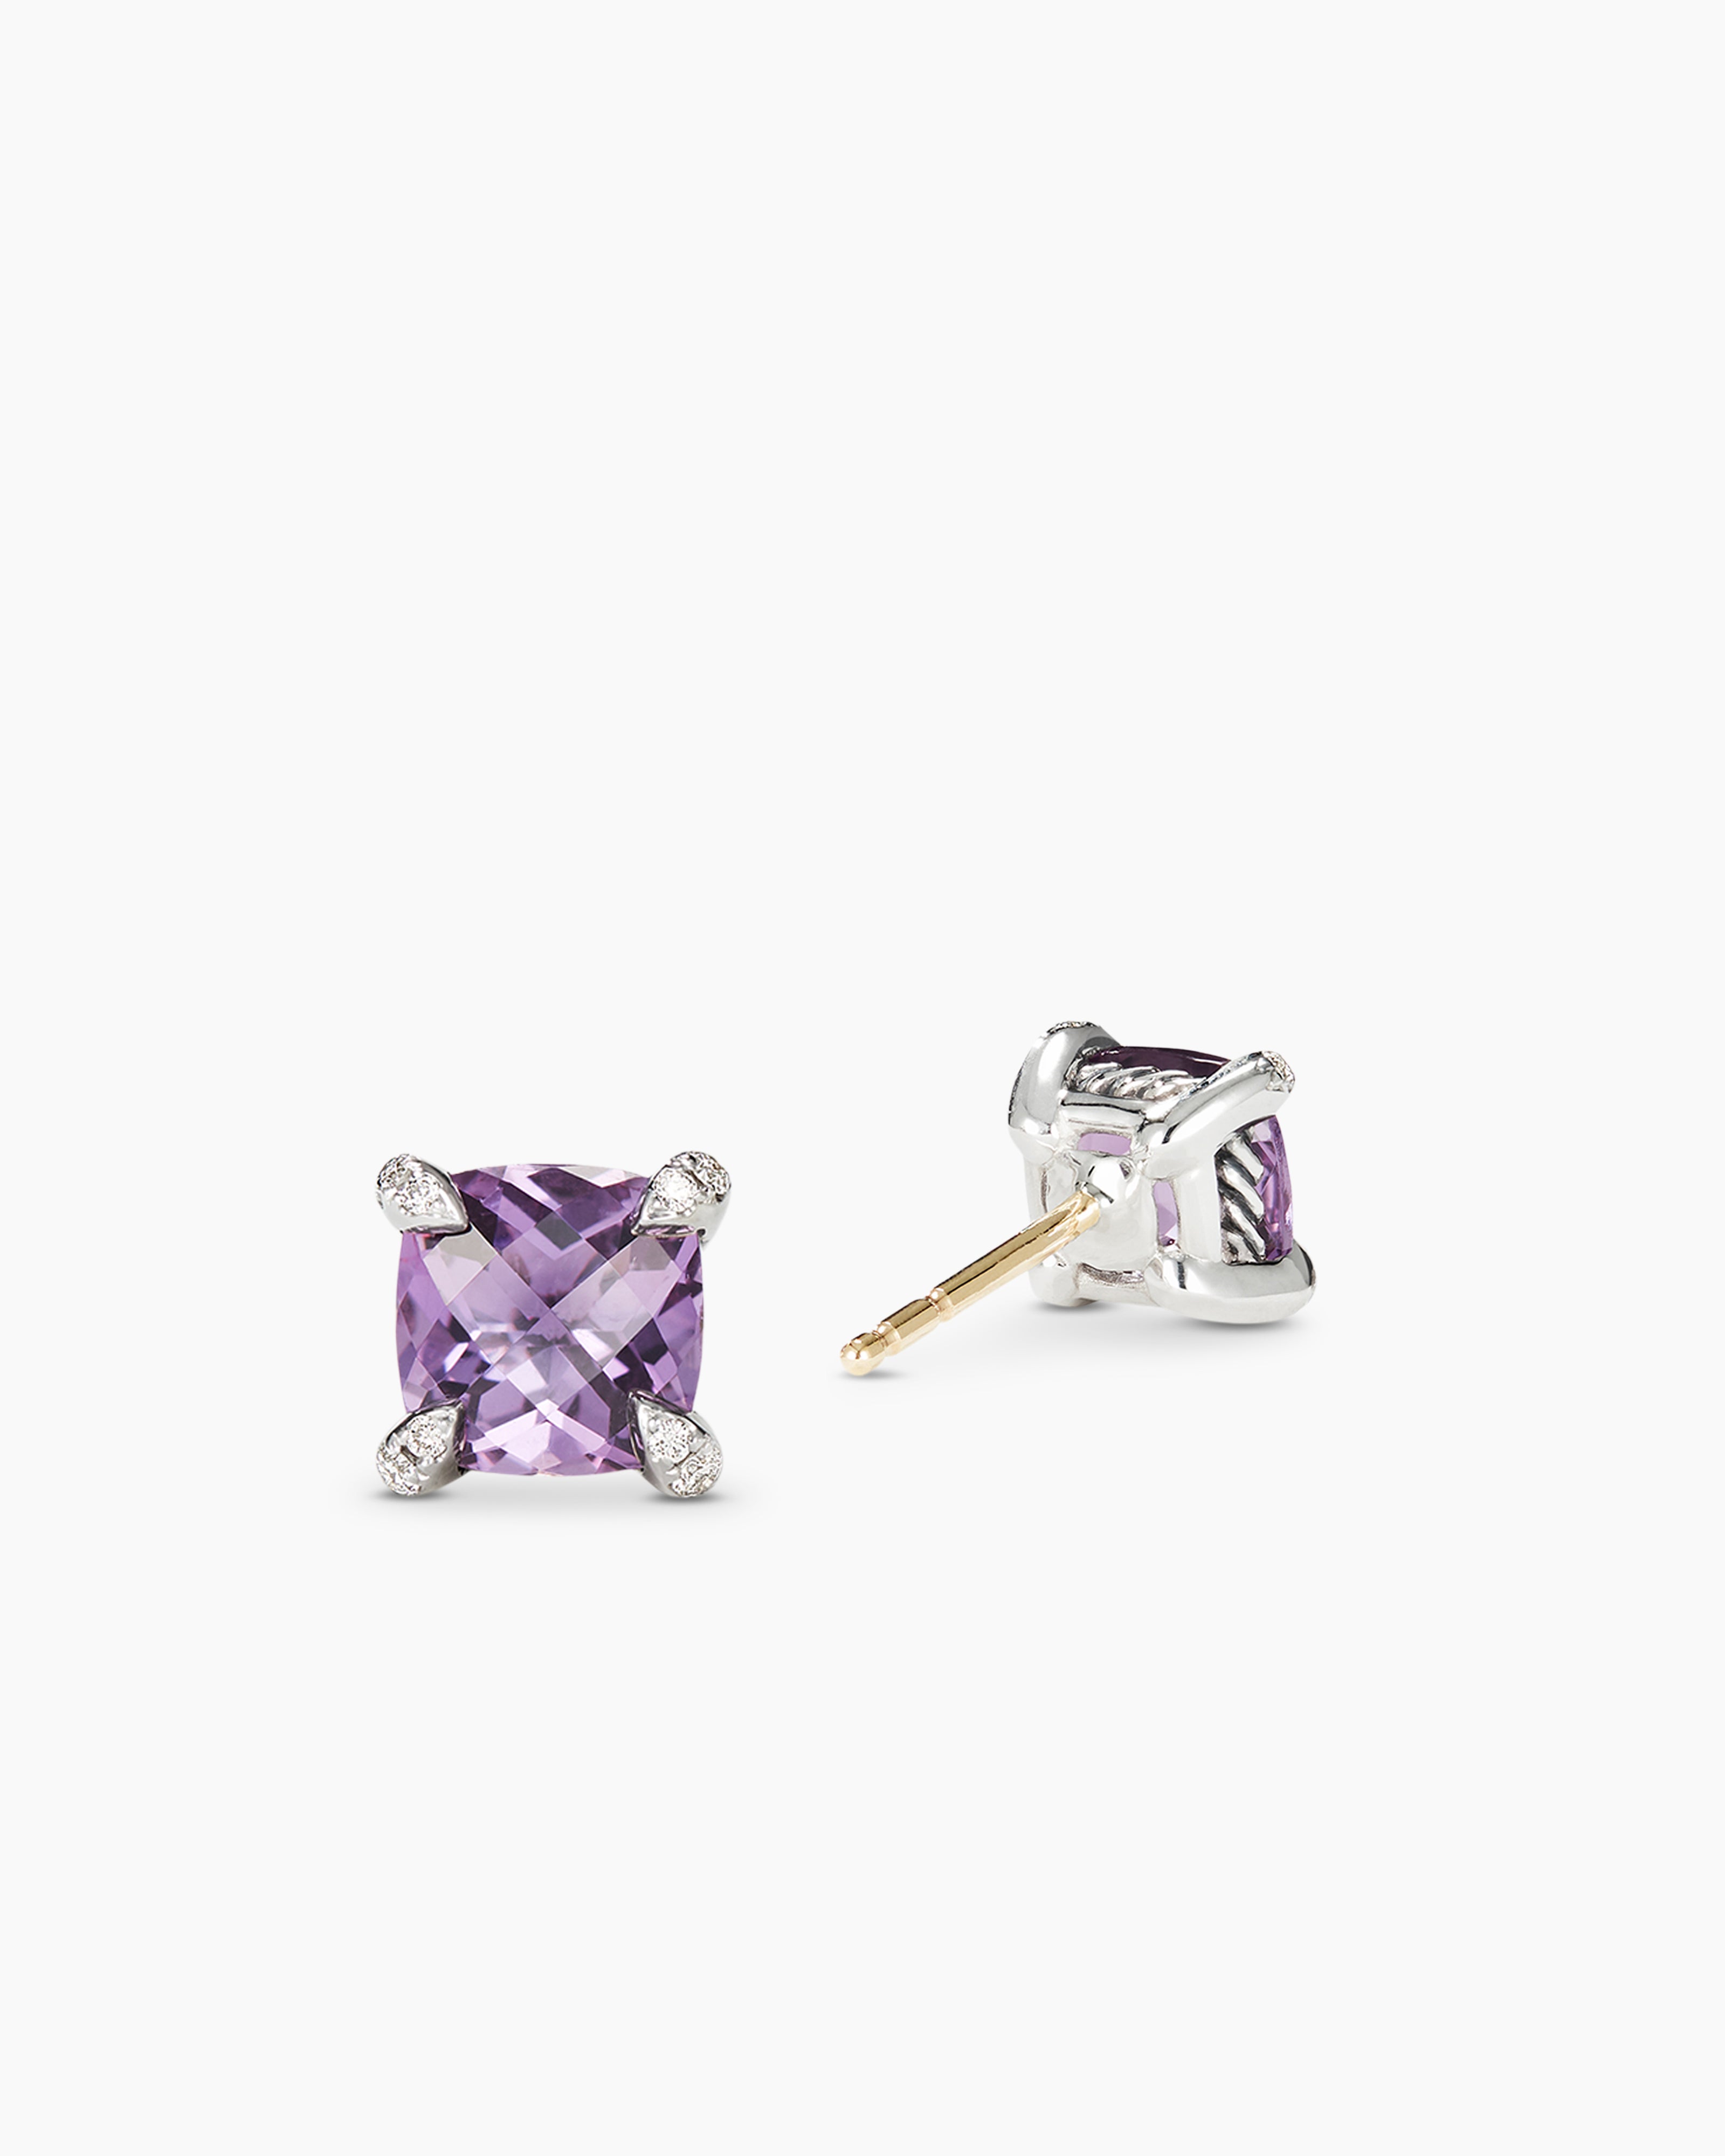 Gold Finish Moissanite Polki & Amethyst Stud Earrings In Sterling Silver  Design by STELLA CREATIONS at Pernia's Pop Up Shop 2024